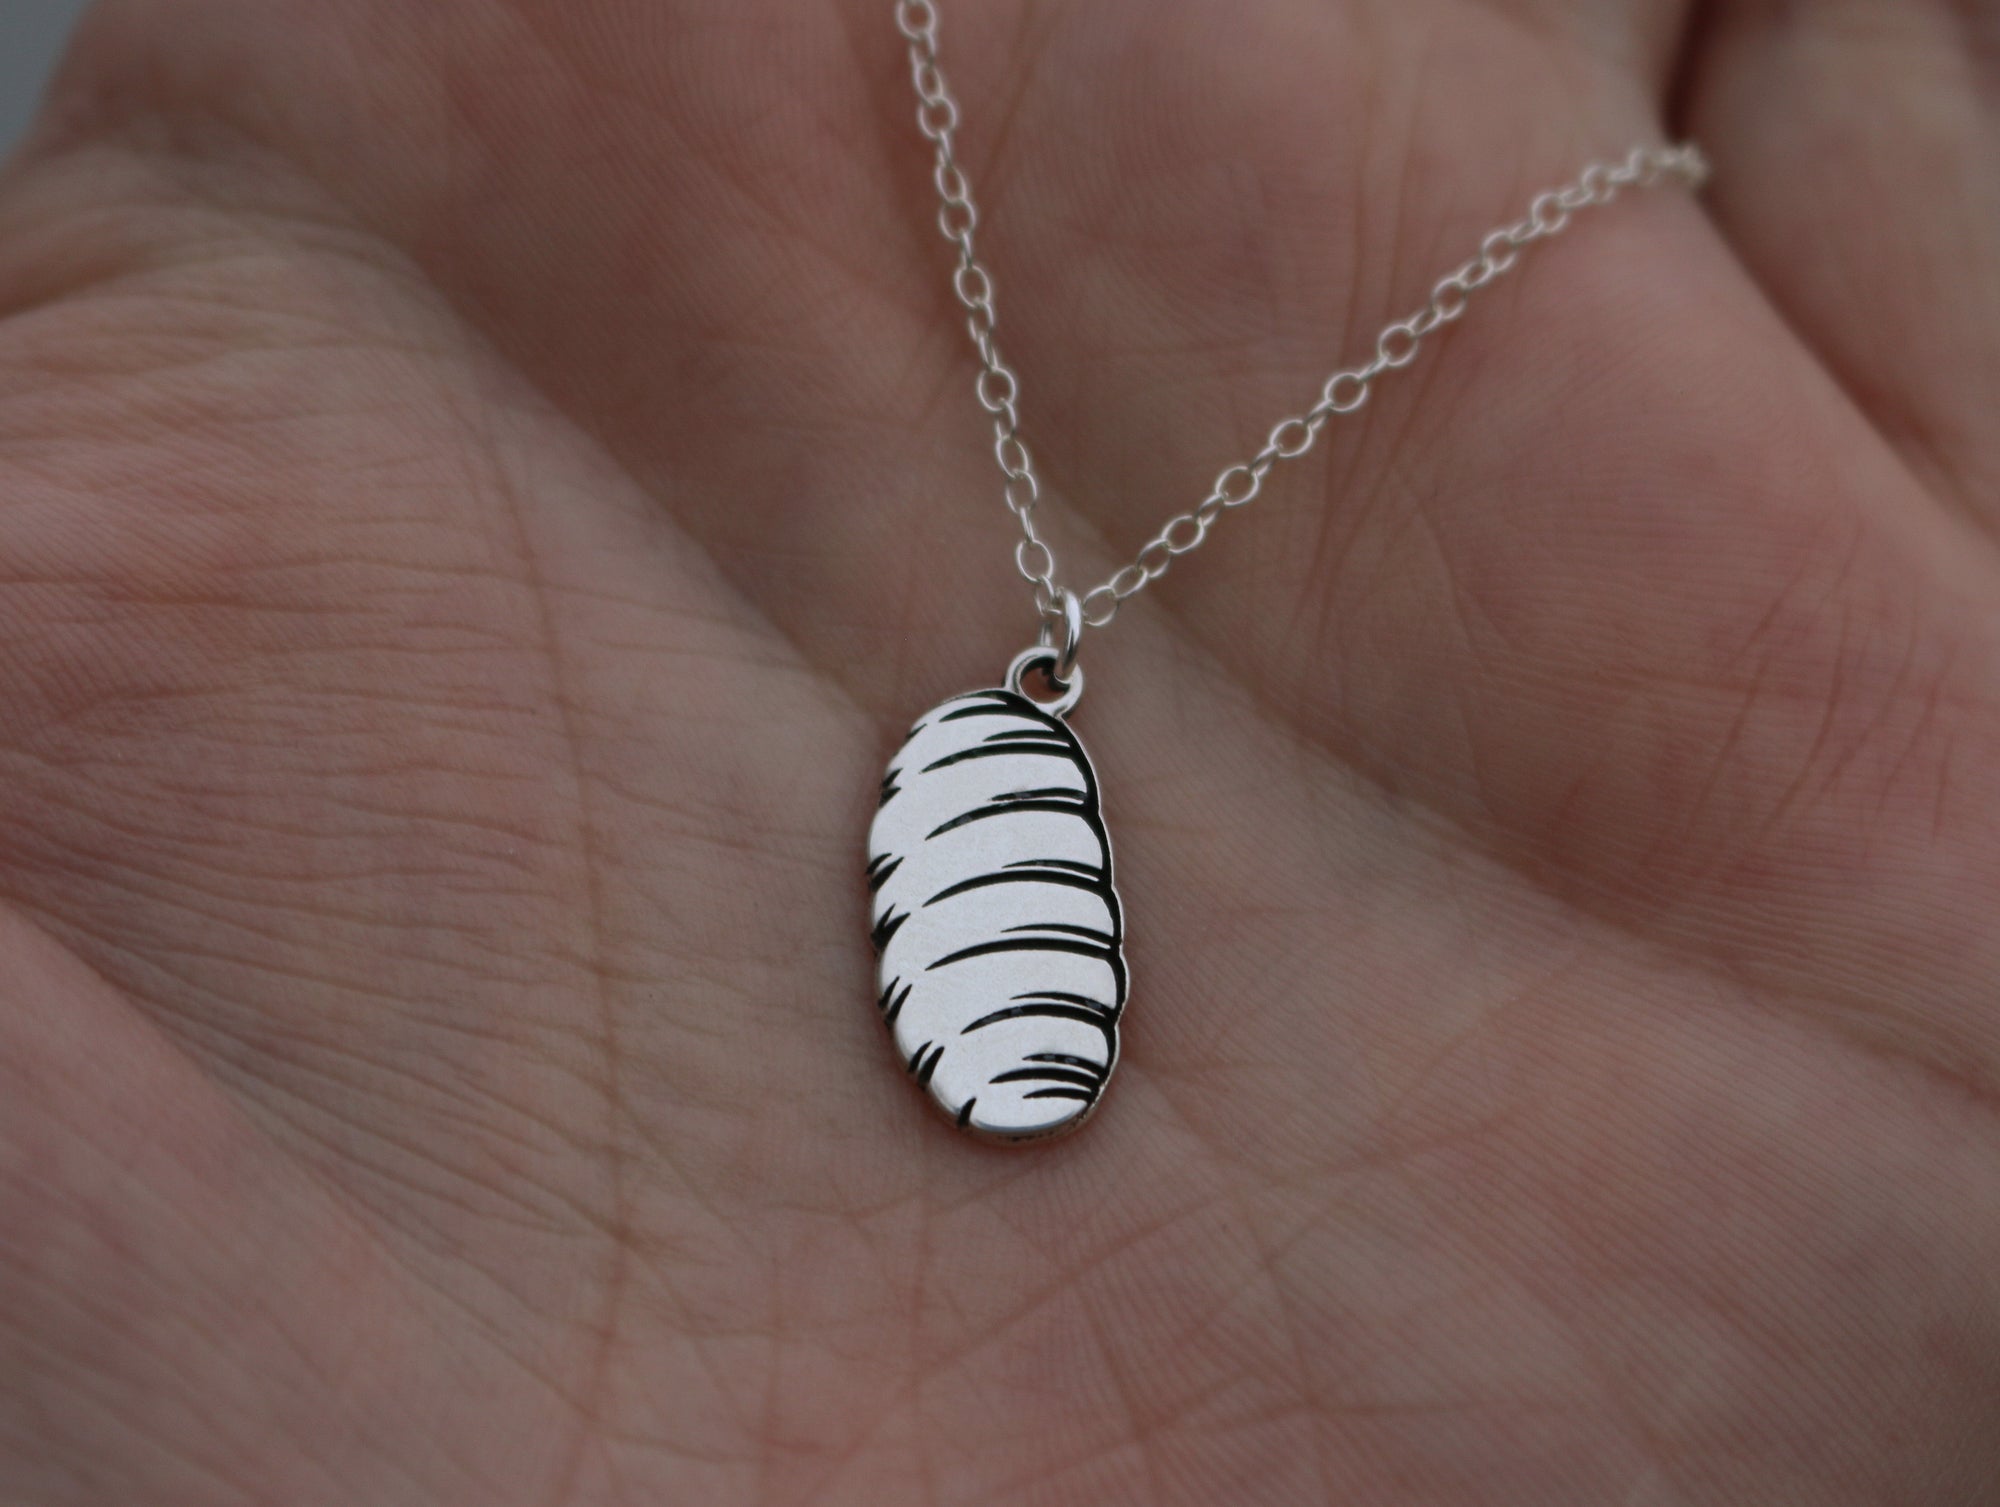 Gnocchi Pasta Necklace - Sterling Silver